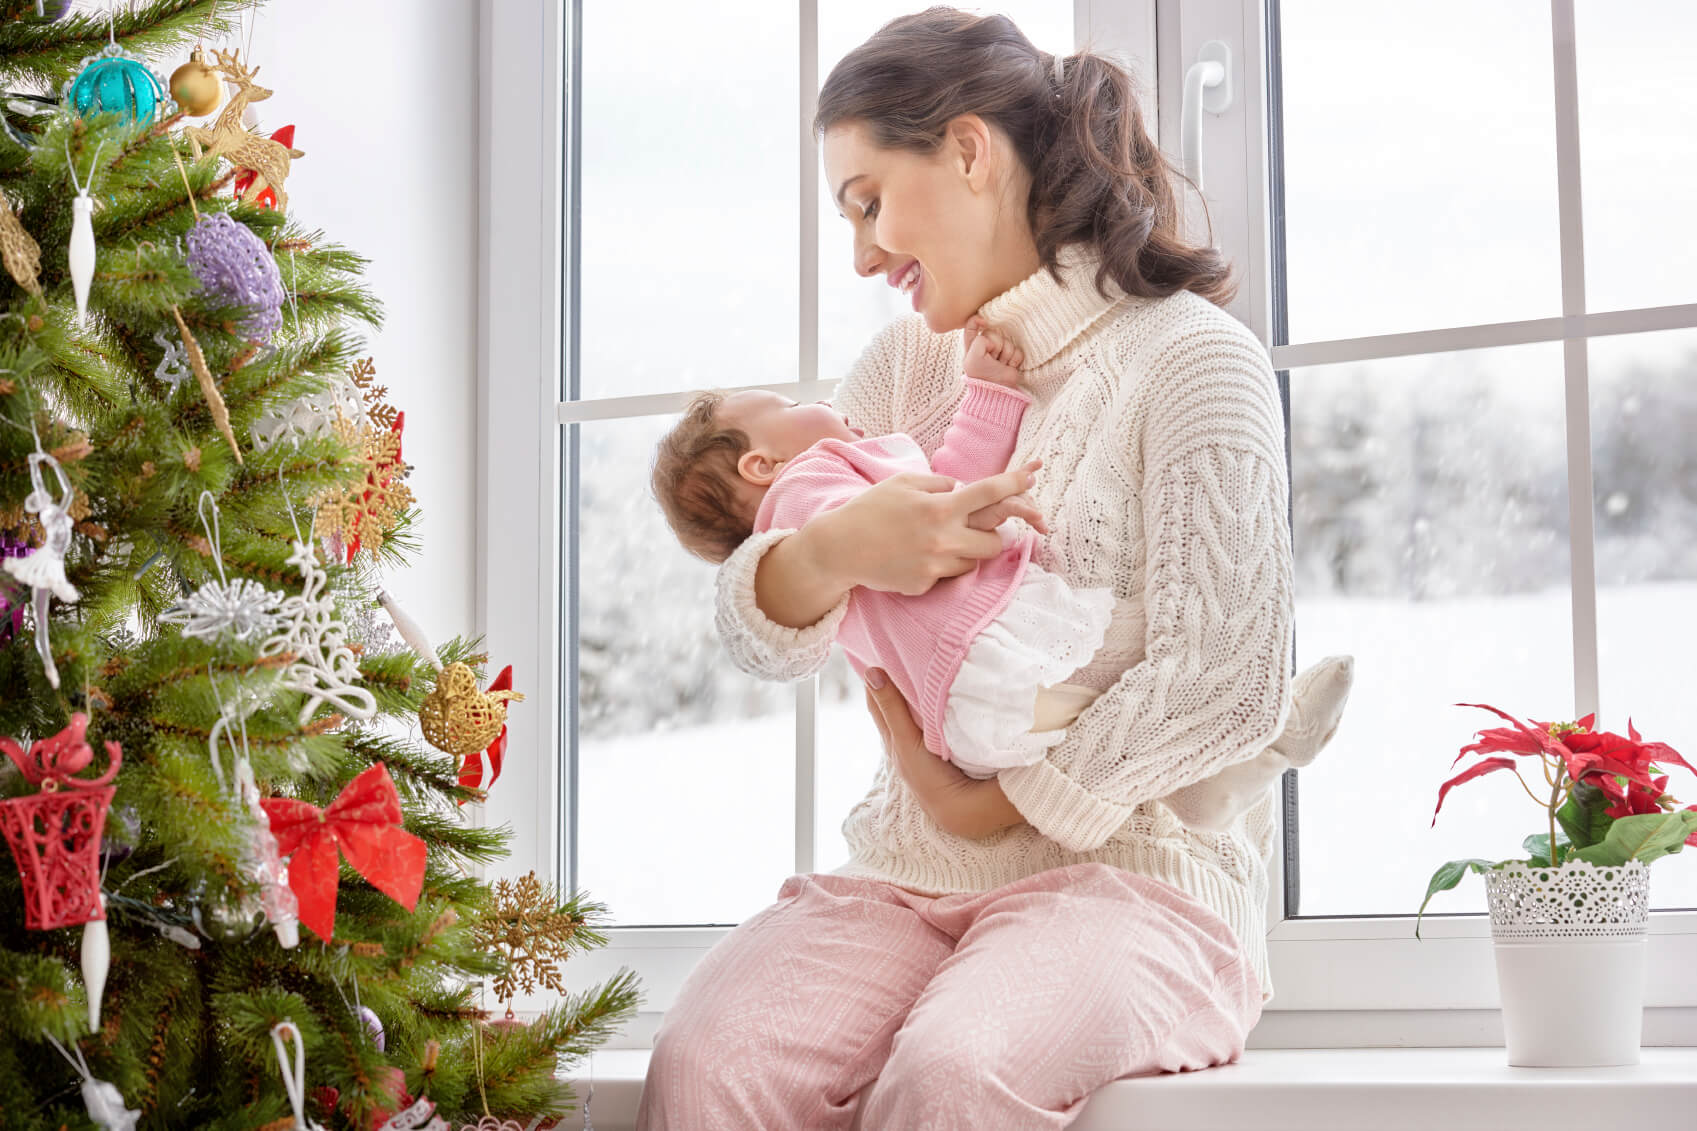 What should you get for a new mom this holiday?